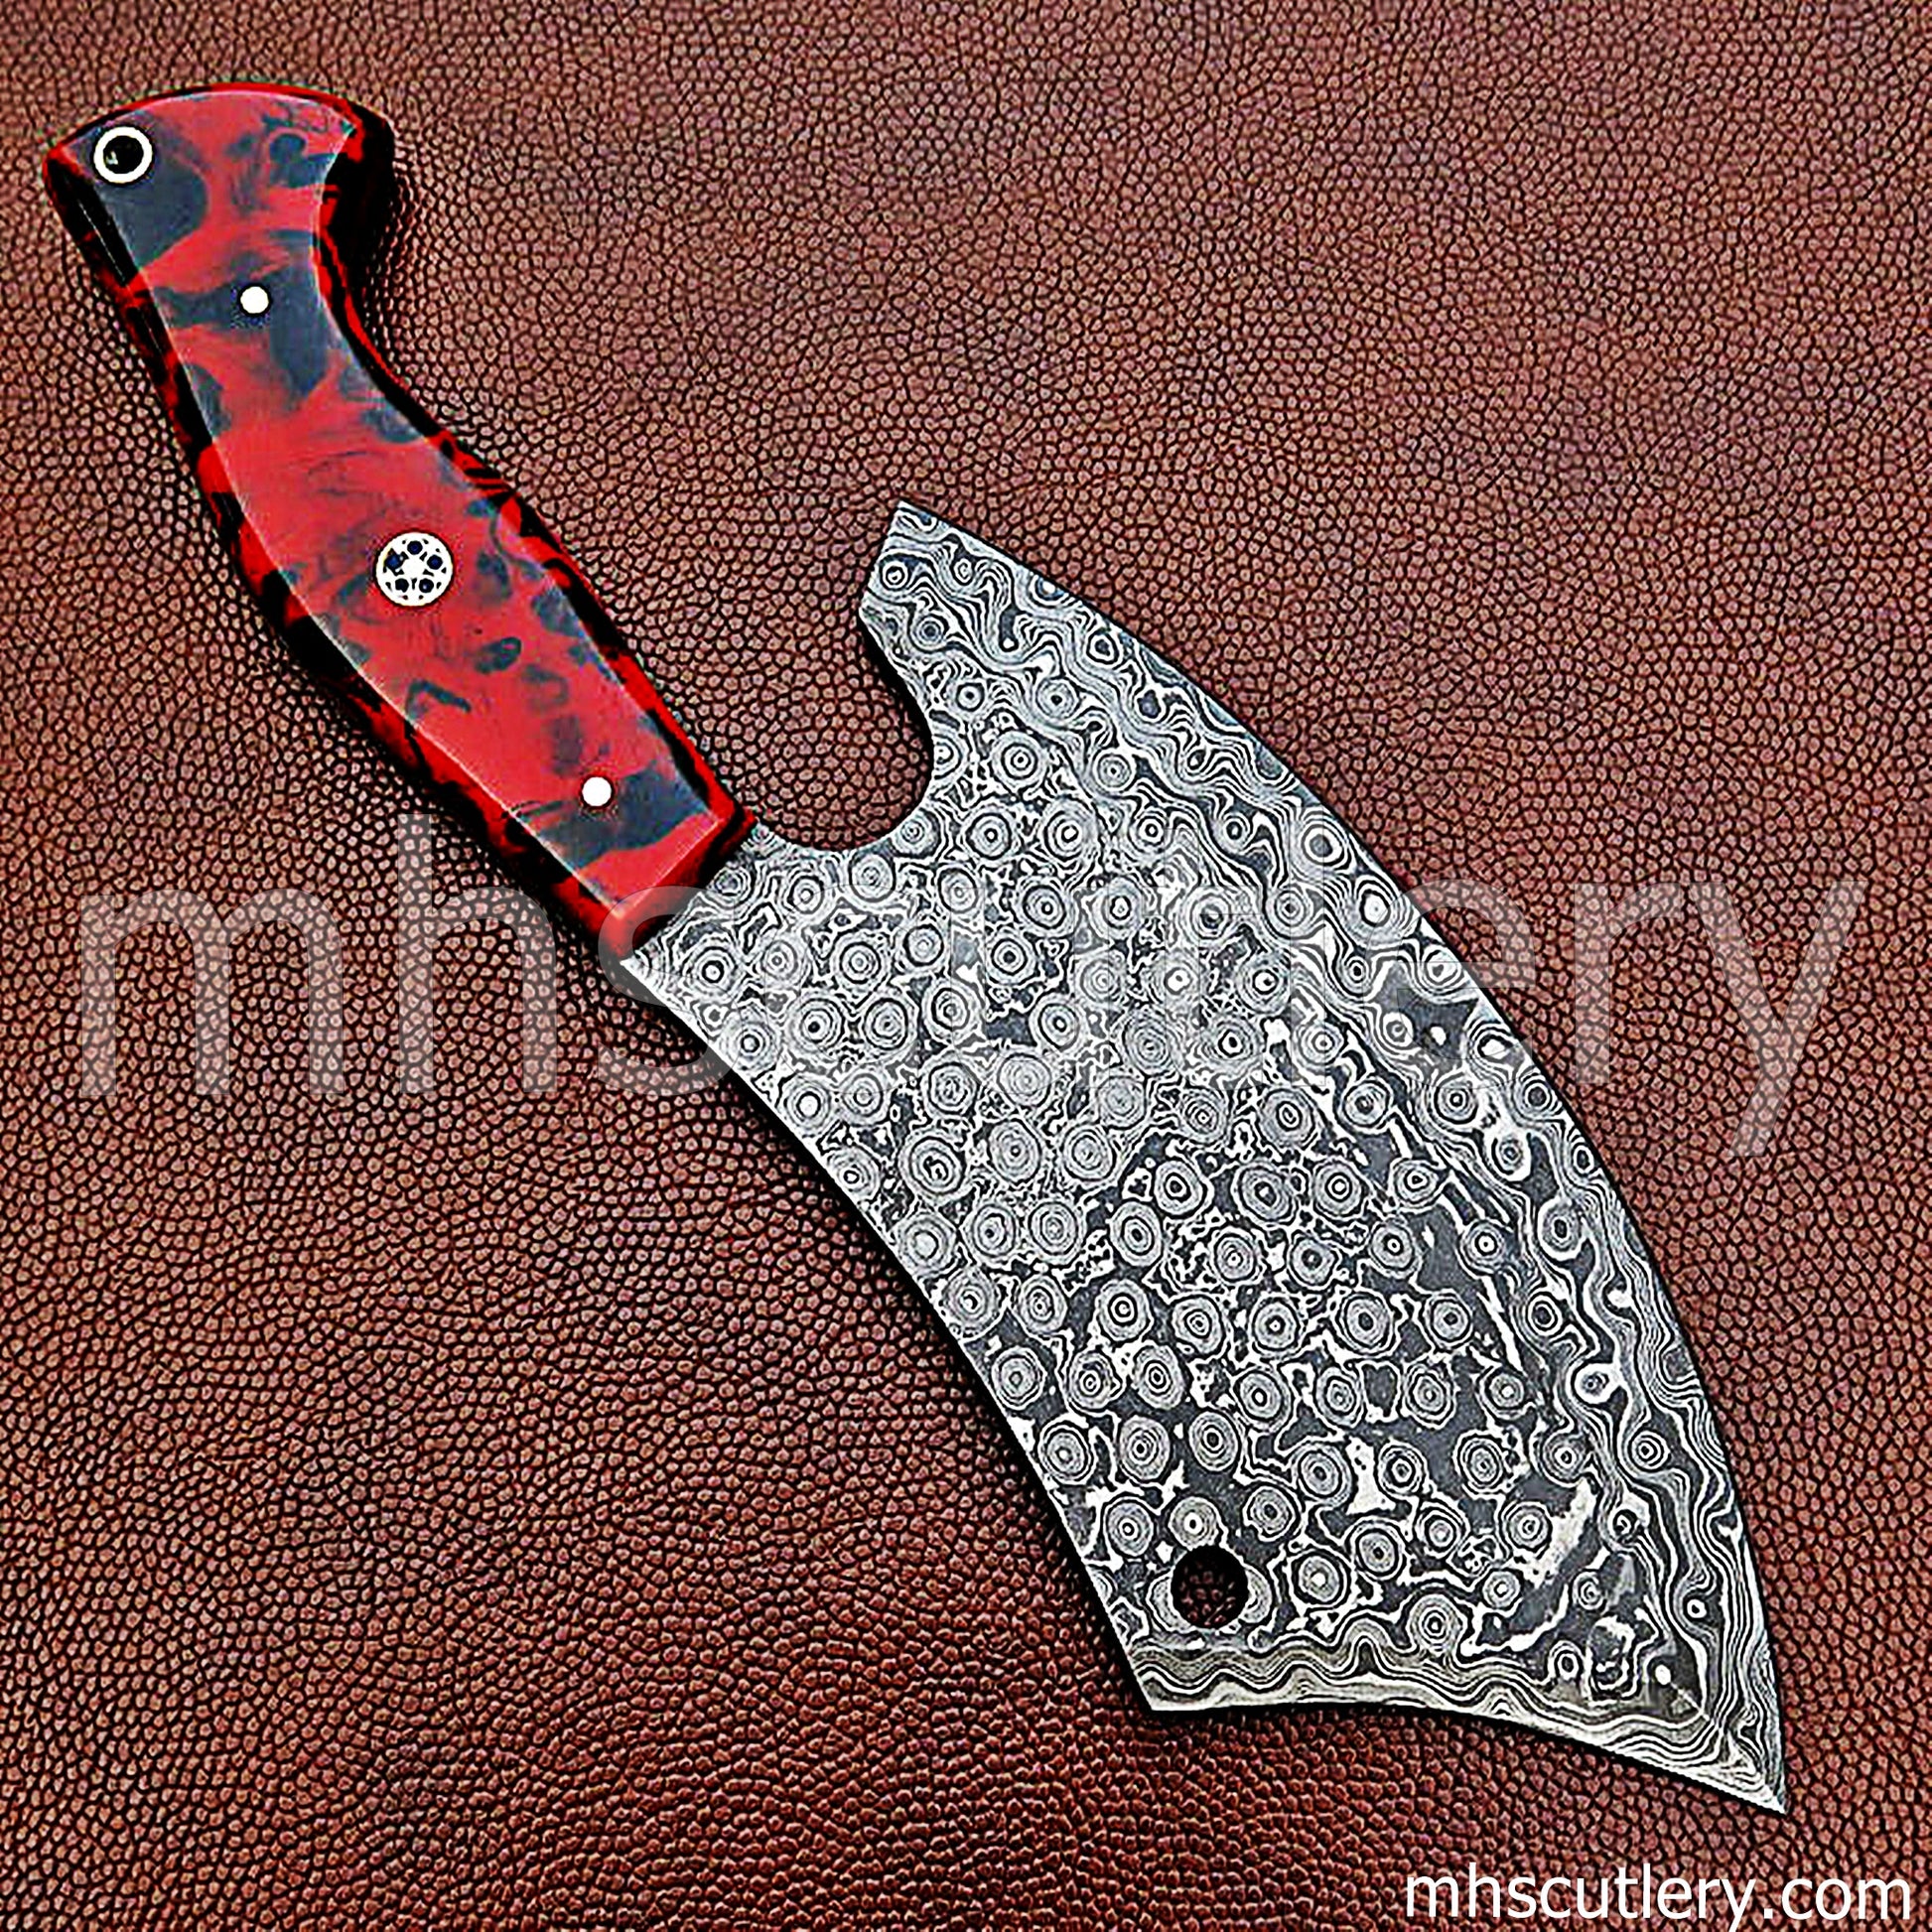 Raindrop Damascus Steel Kitchen's Chef Cleaver Knife / Resin Handle | mhscutlery